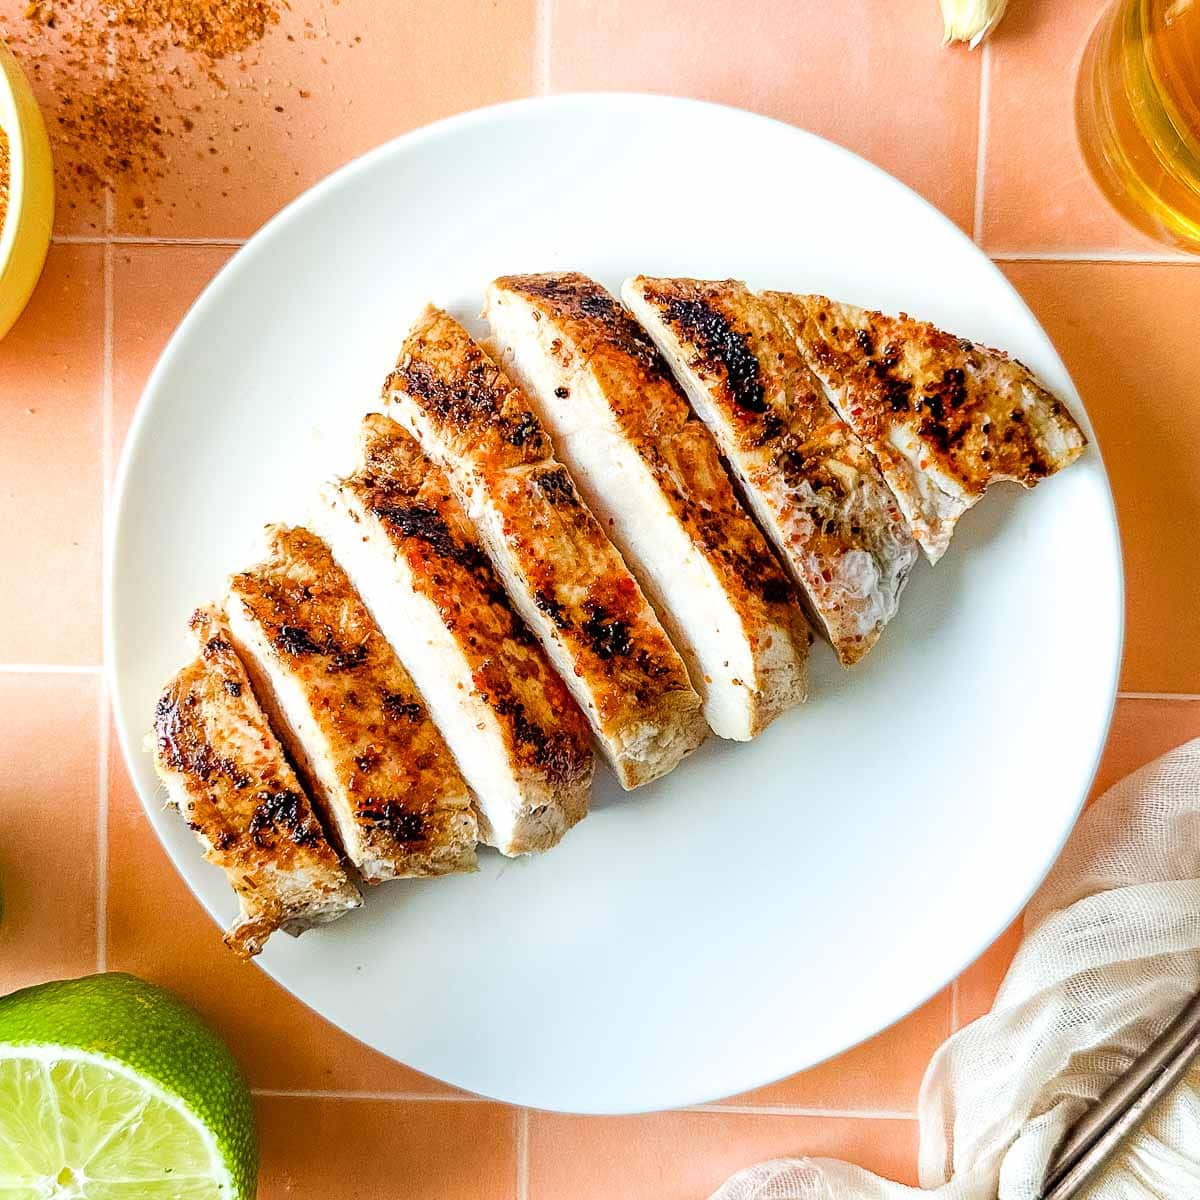 Sliced Tajín Grilled Chicken sits on a white plate surrounded by Tajín seasoning, a sliced lime, a white linen, and a small glass of beer.